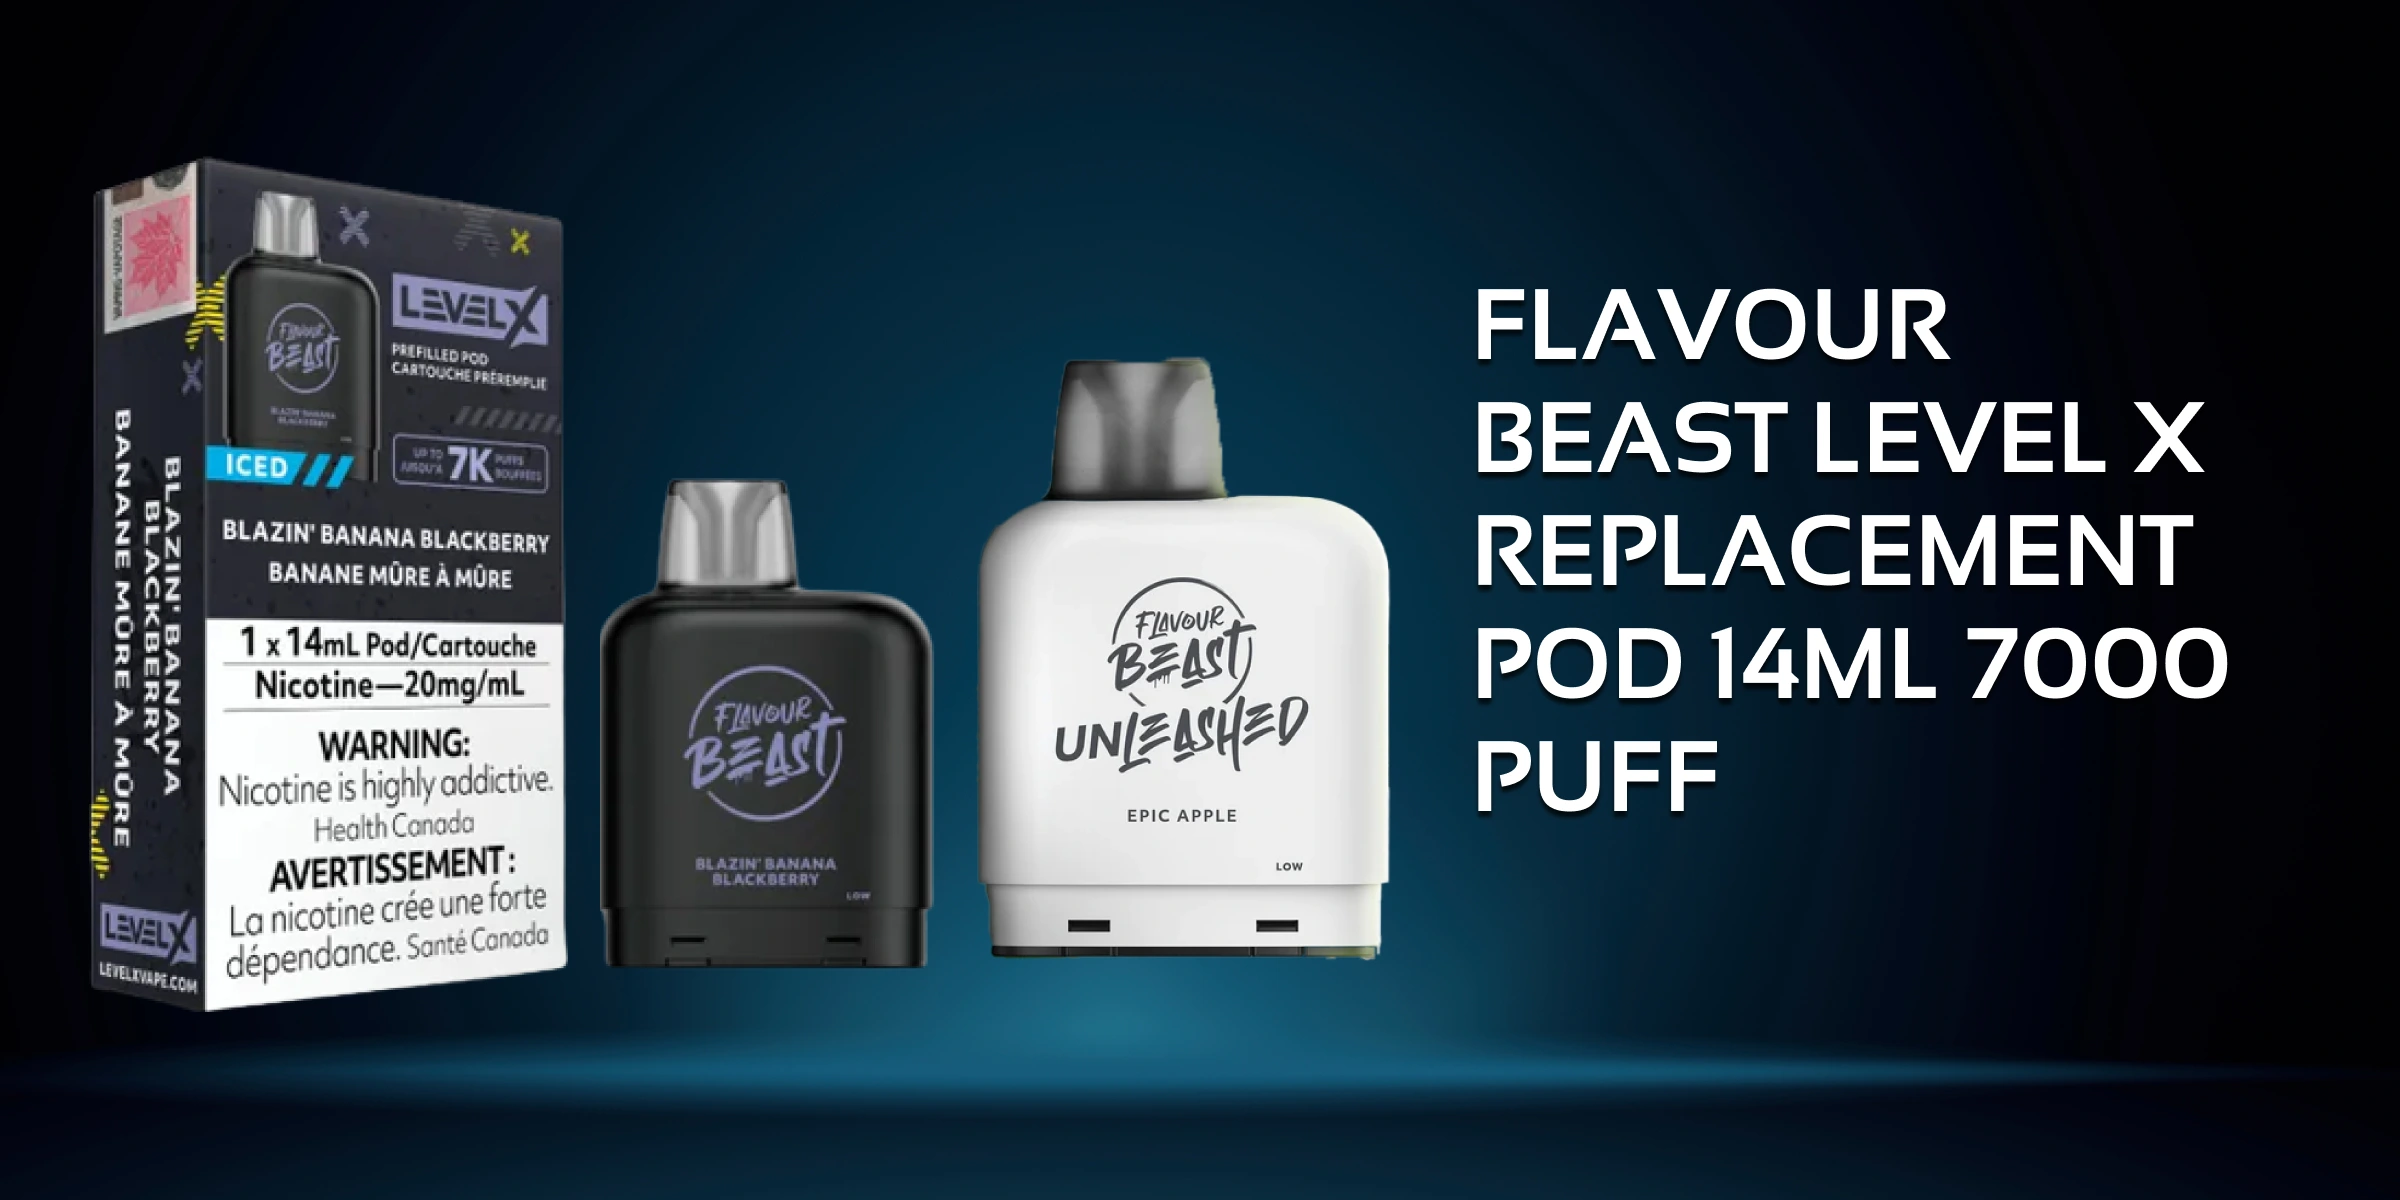 FLAVOUR BEAST LEVEL X REPLACEMENT POD 14ML 7000 PUFF